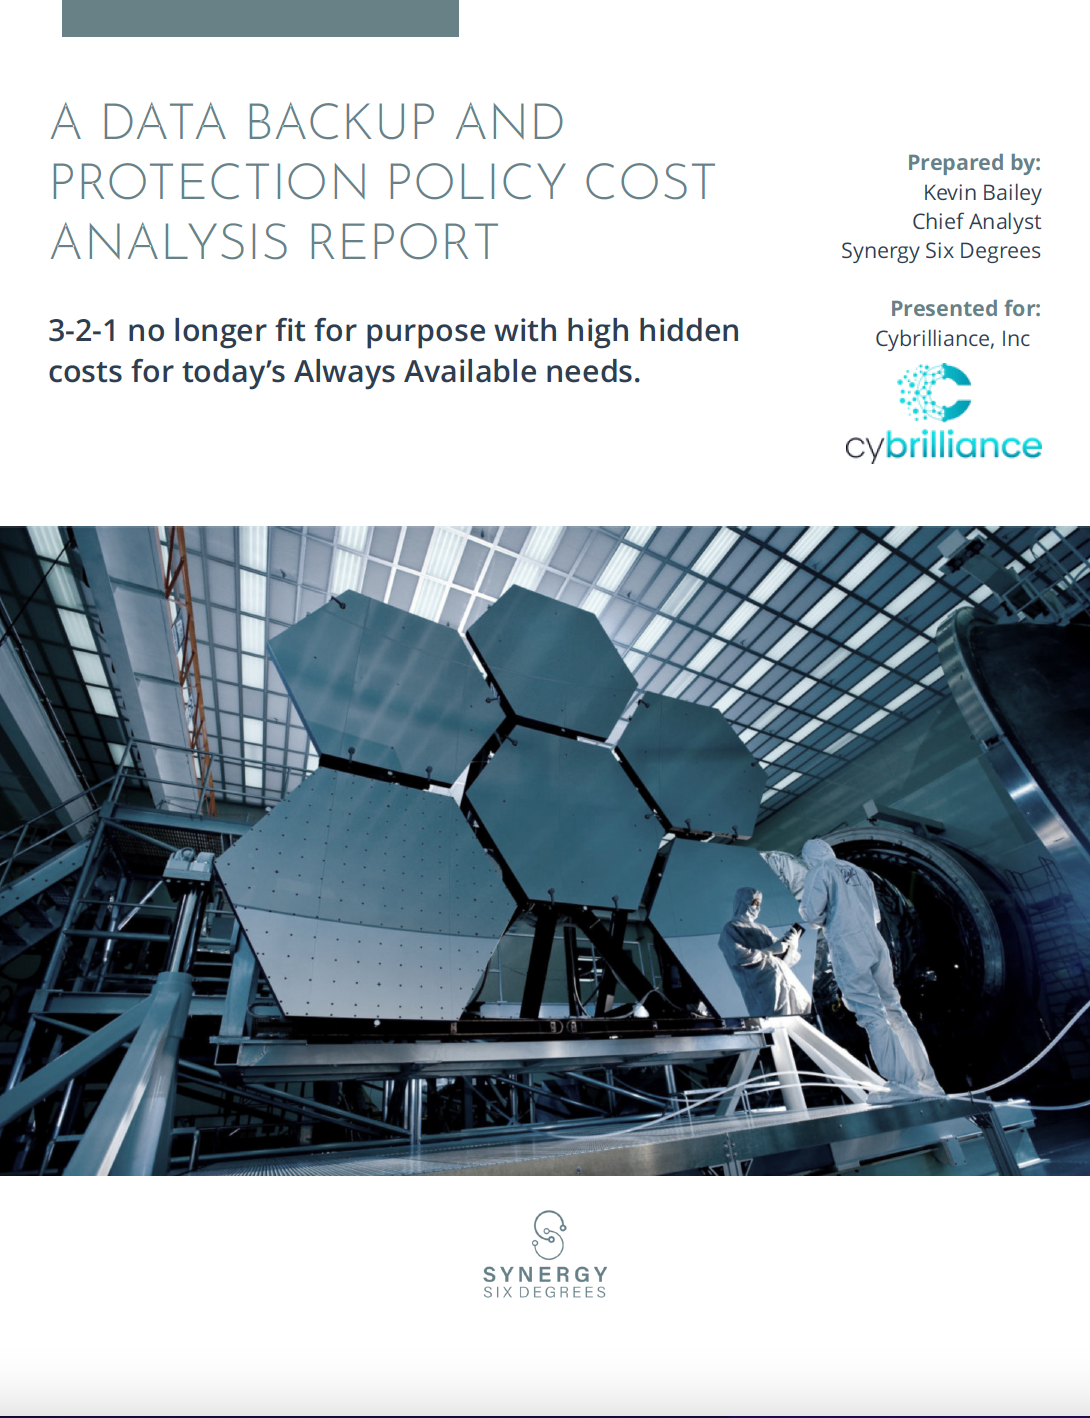 A Data Backup and Protection Policy Cost Analysis Report